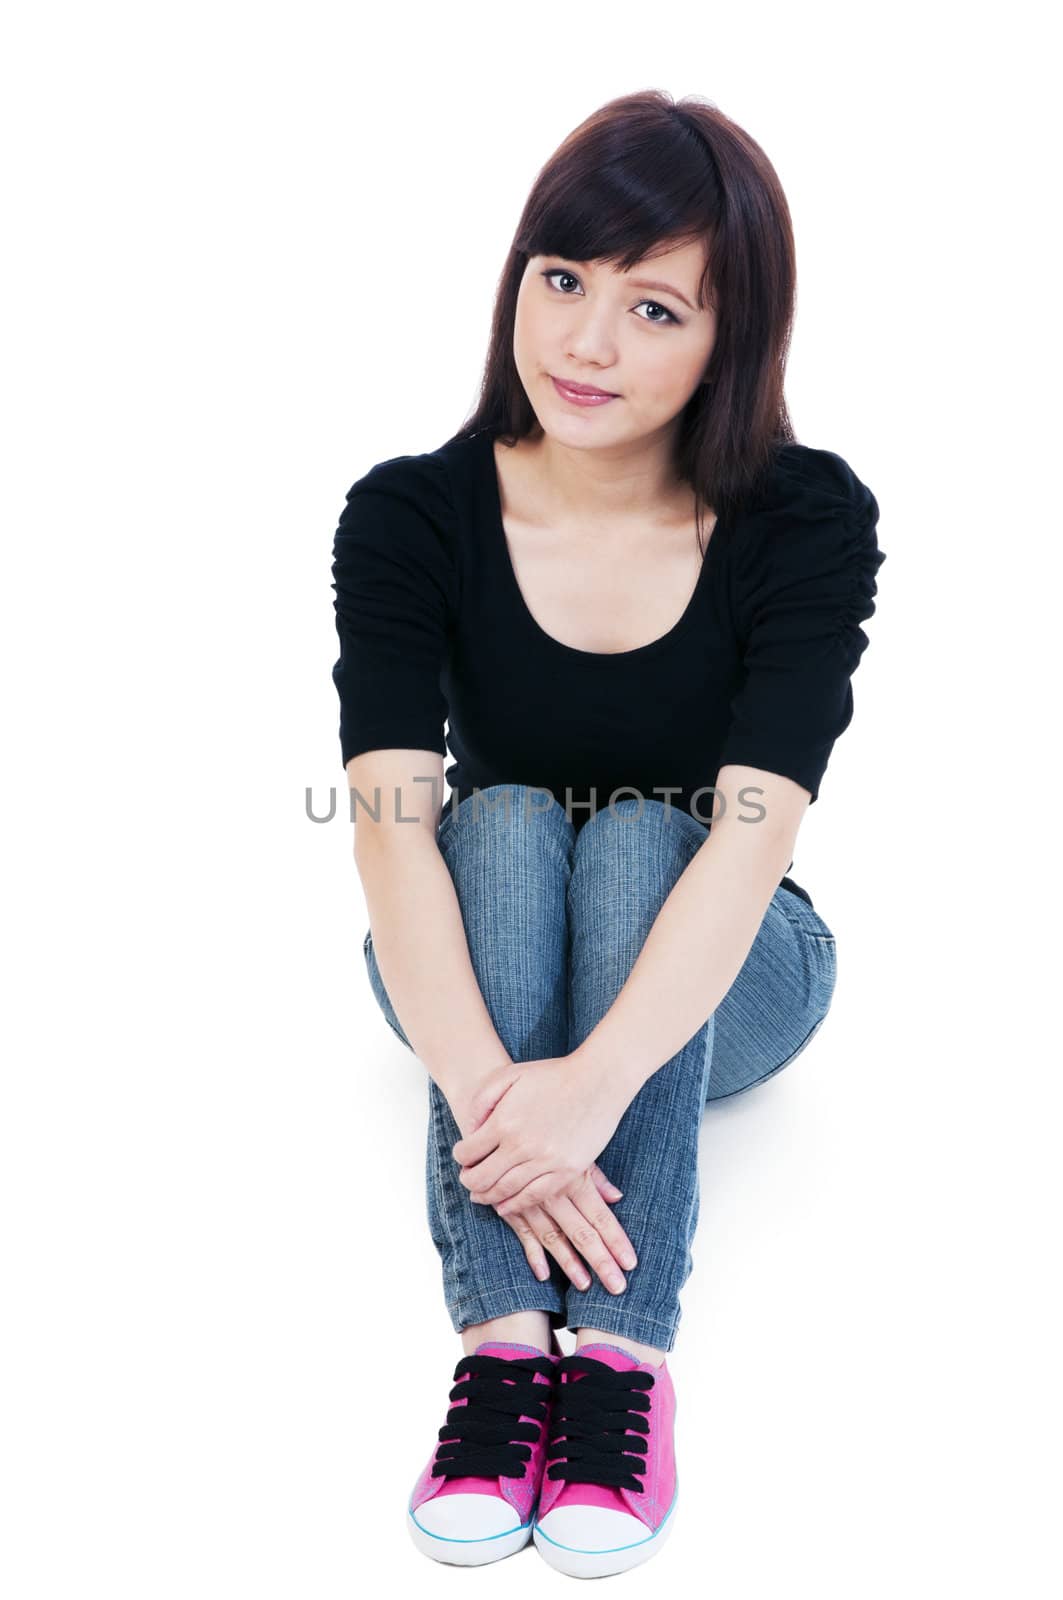 Portrait of a casual young woman sitting on floor over white background.